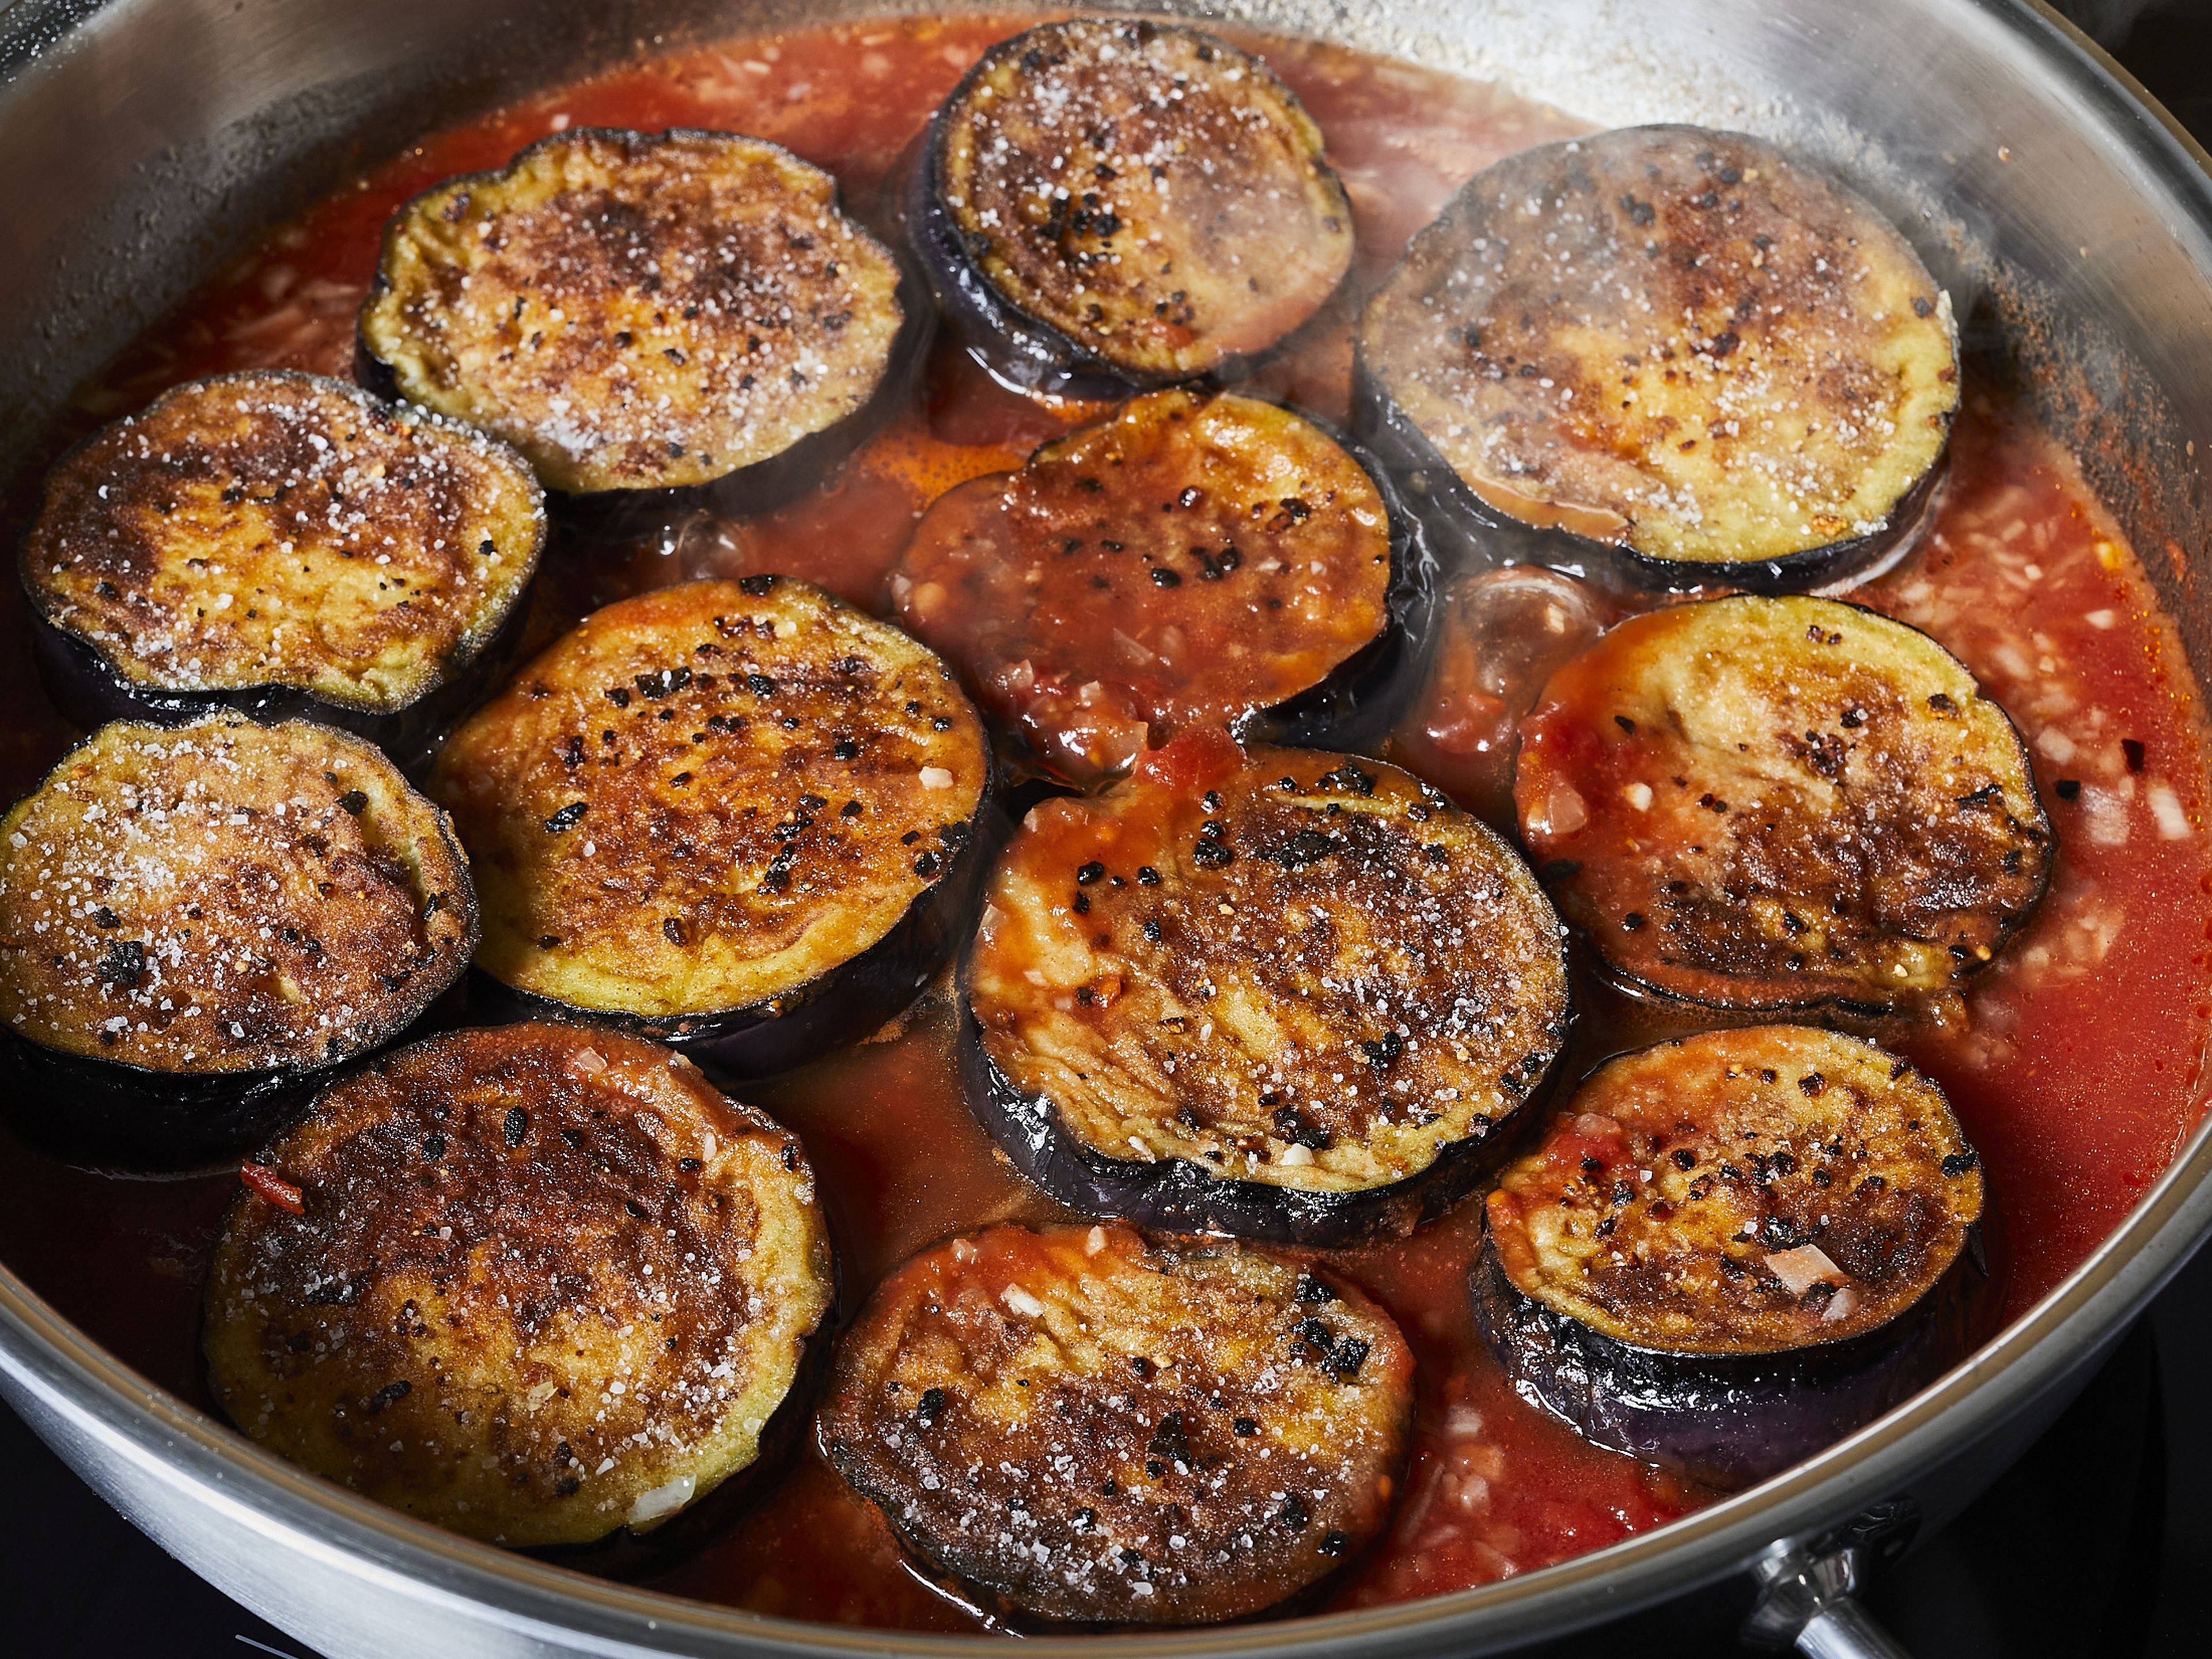 Return eggplant to the sauce in the pan and let simmer while covered for approx. 12 min. until eggplant is tender, turn it over once. Then remove the lid and let simmer for another 4–6 min. until the sauce is thick.